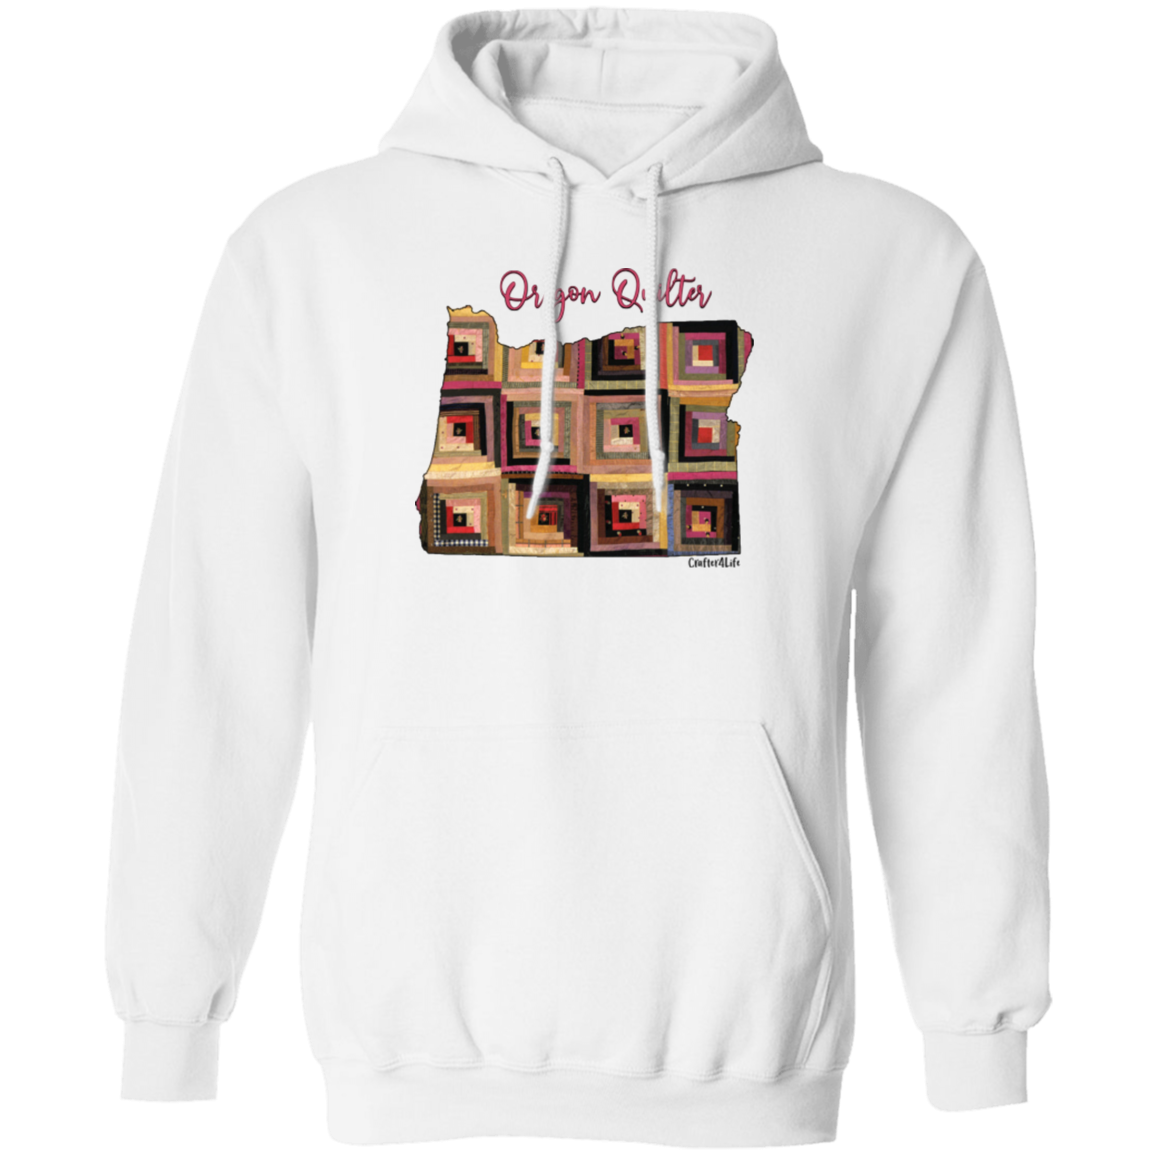 Oregon Quilter Pullover Hoodie, Gift for Quilting Friends and Family